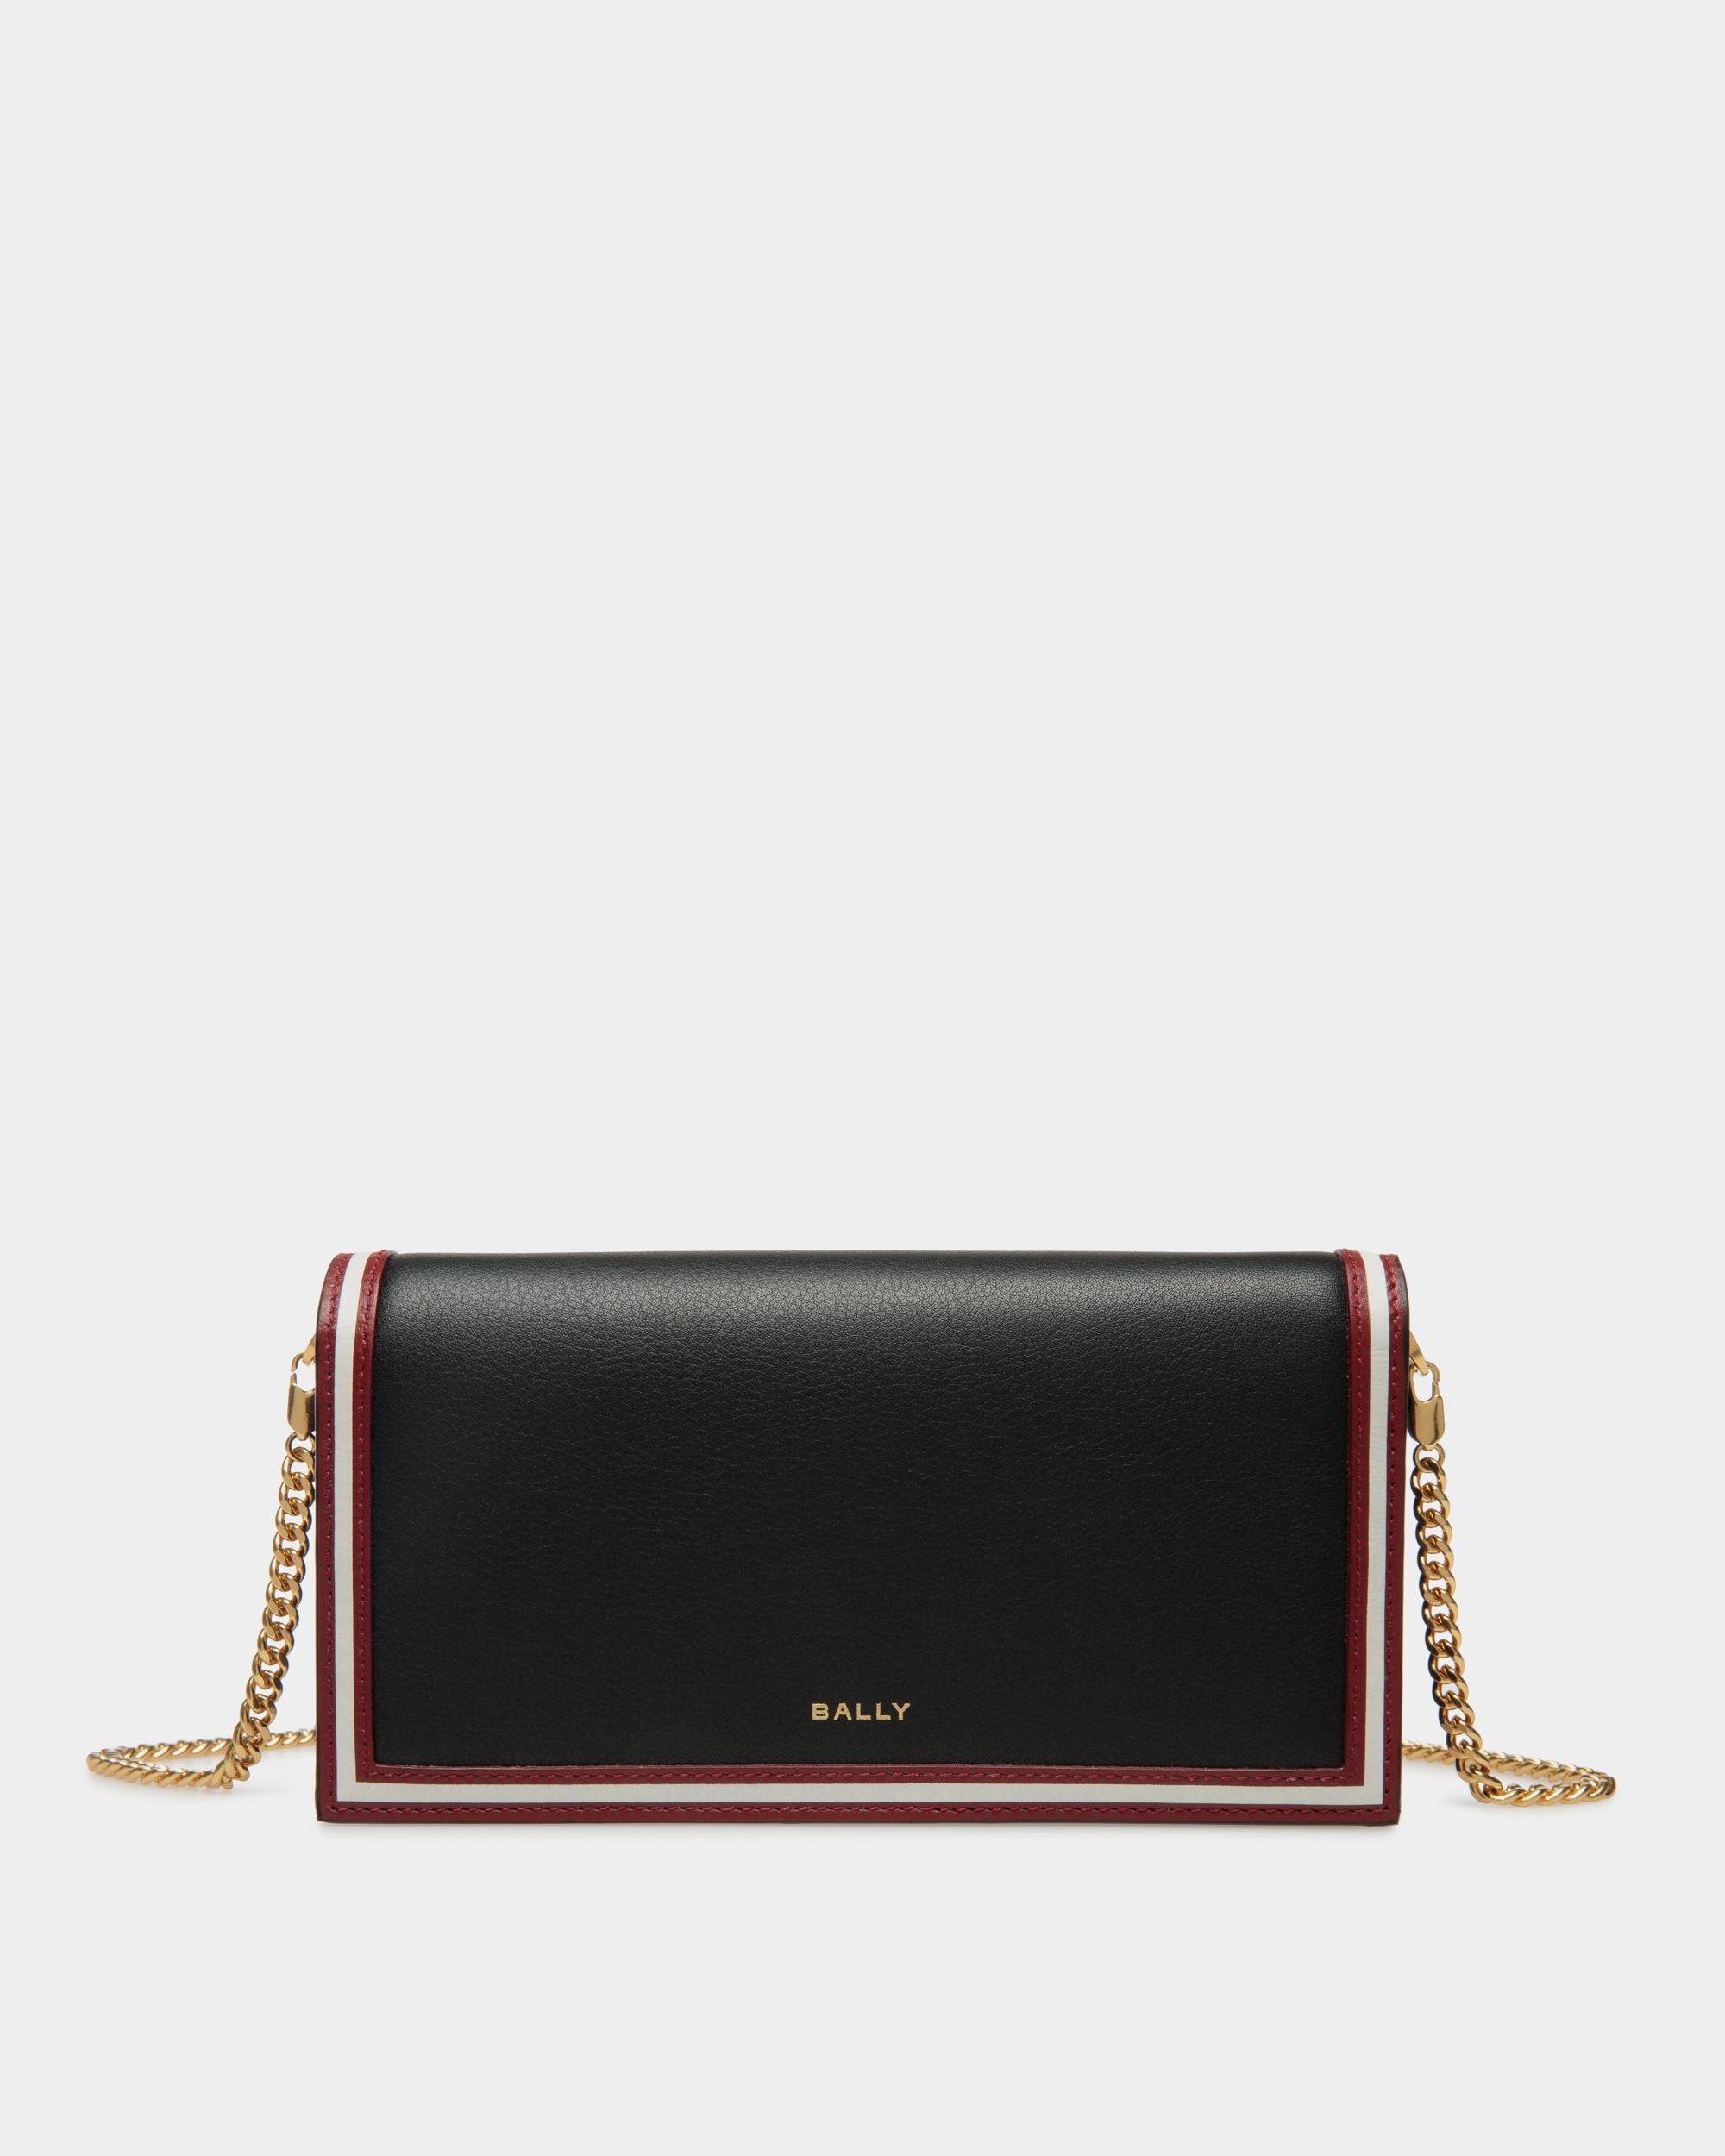 Women's Code Wallet on a Chain in Black Leather | Bally | Still Life Front